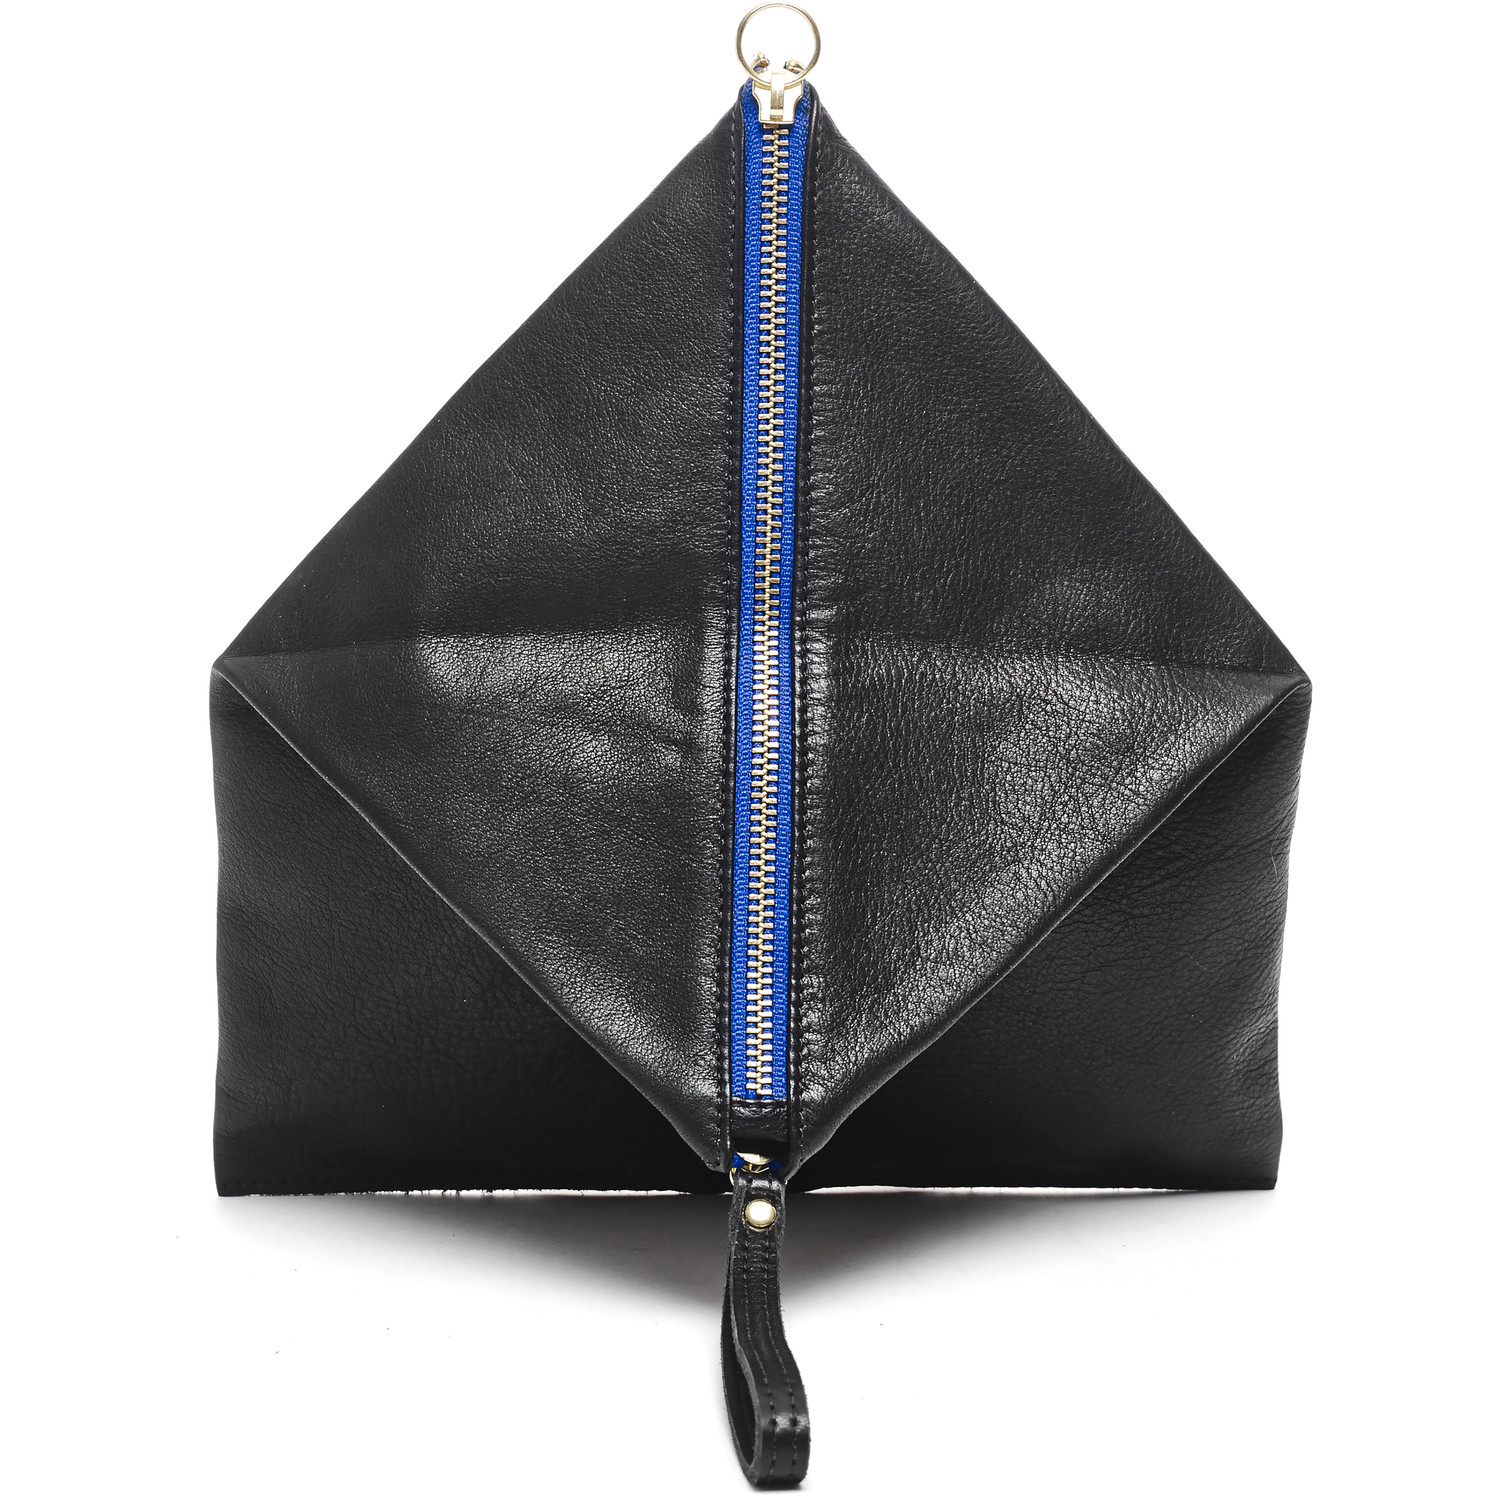 Campos Bags: Kite Clutch Origami Bag SOLD OUT